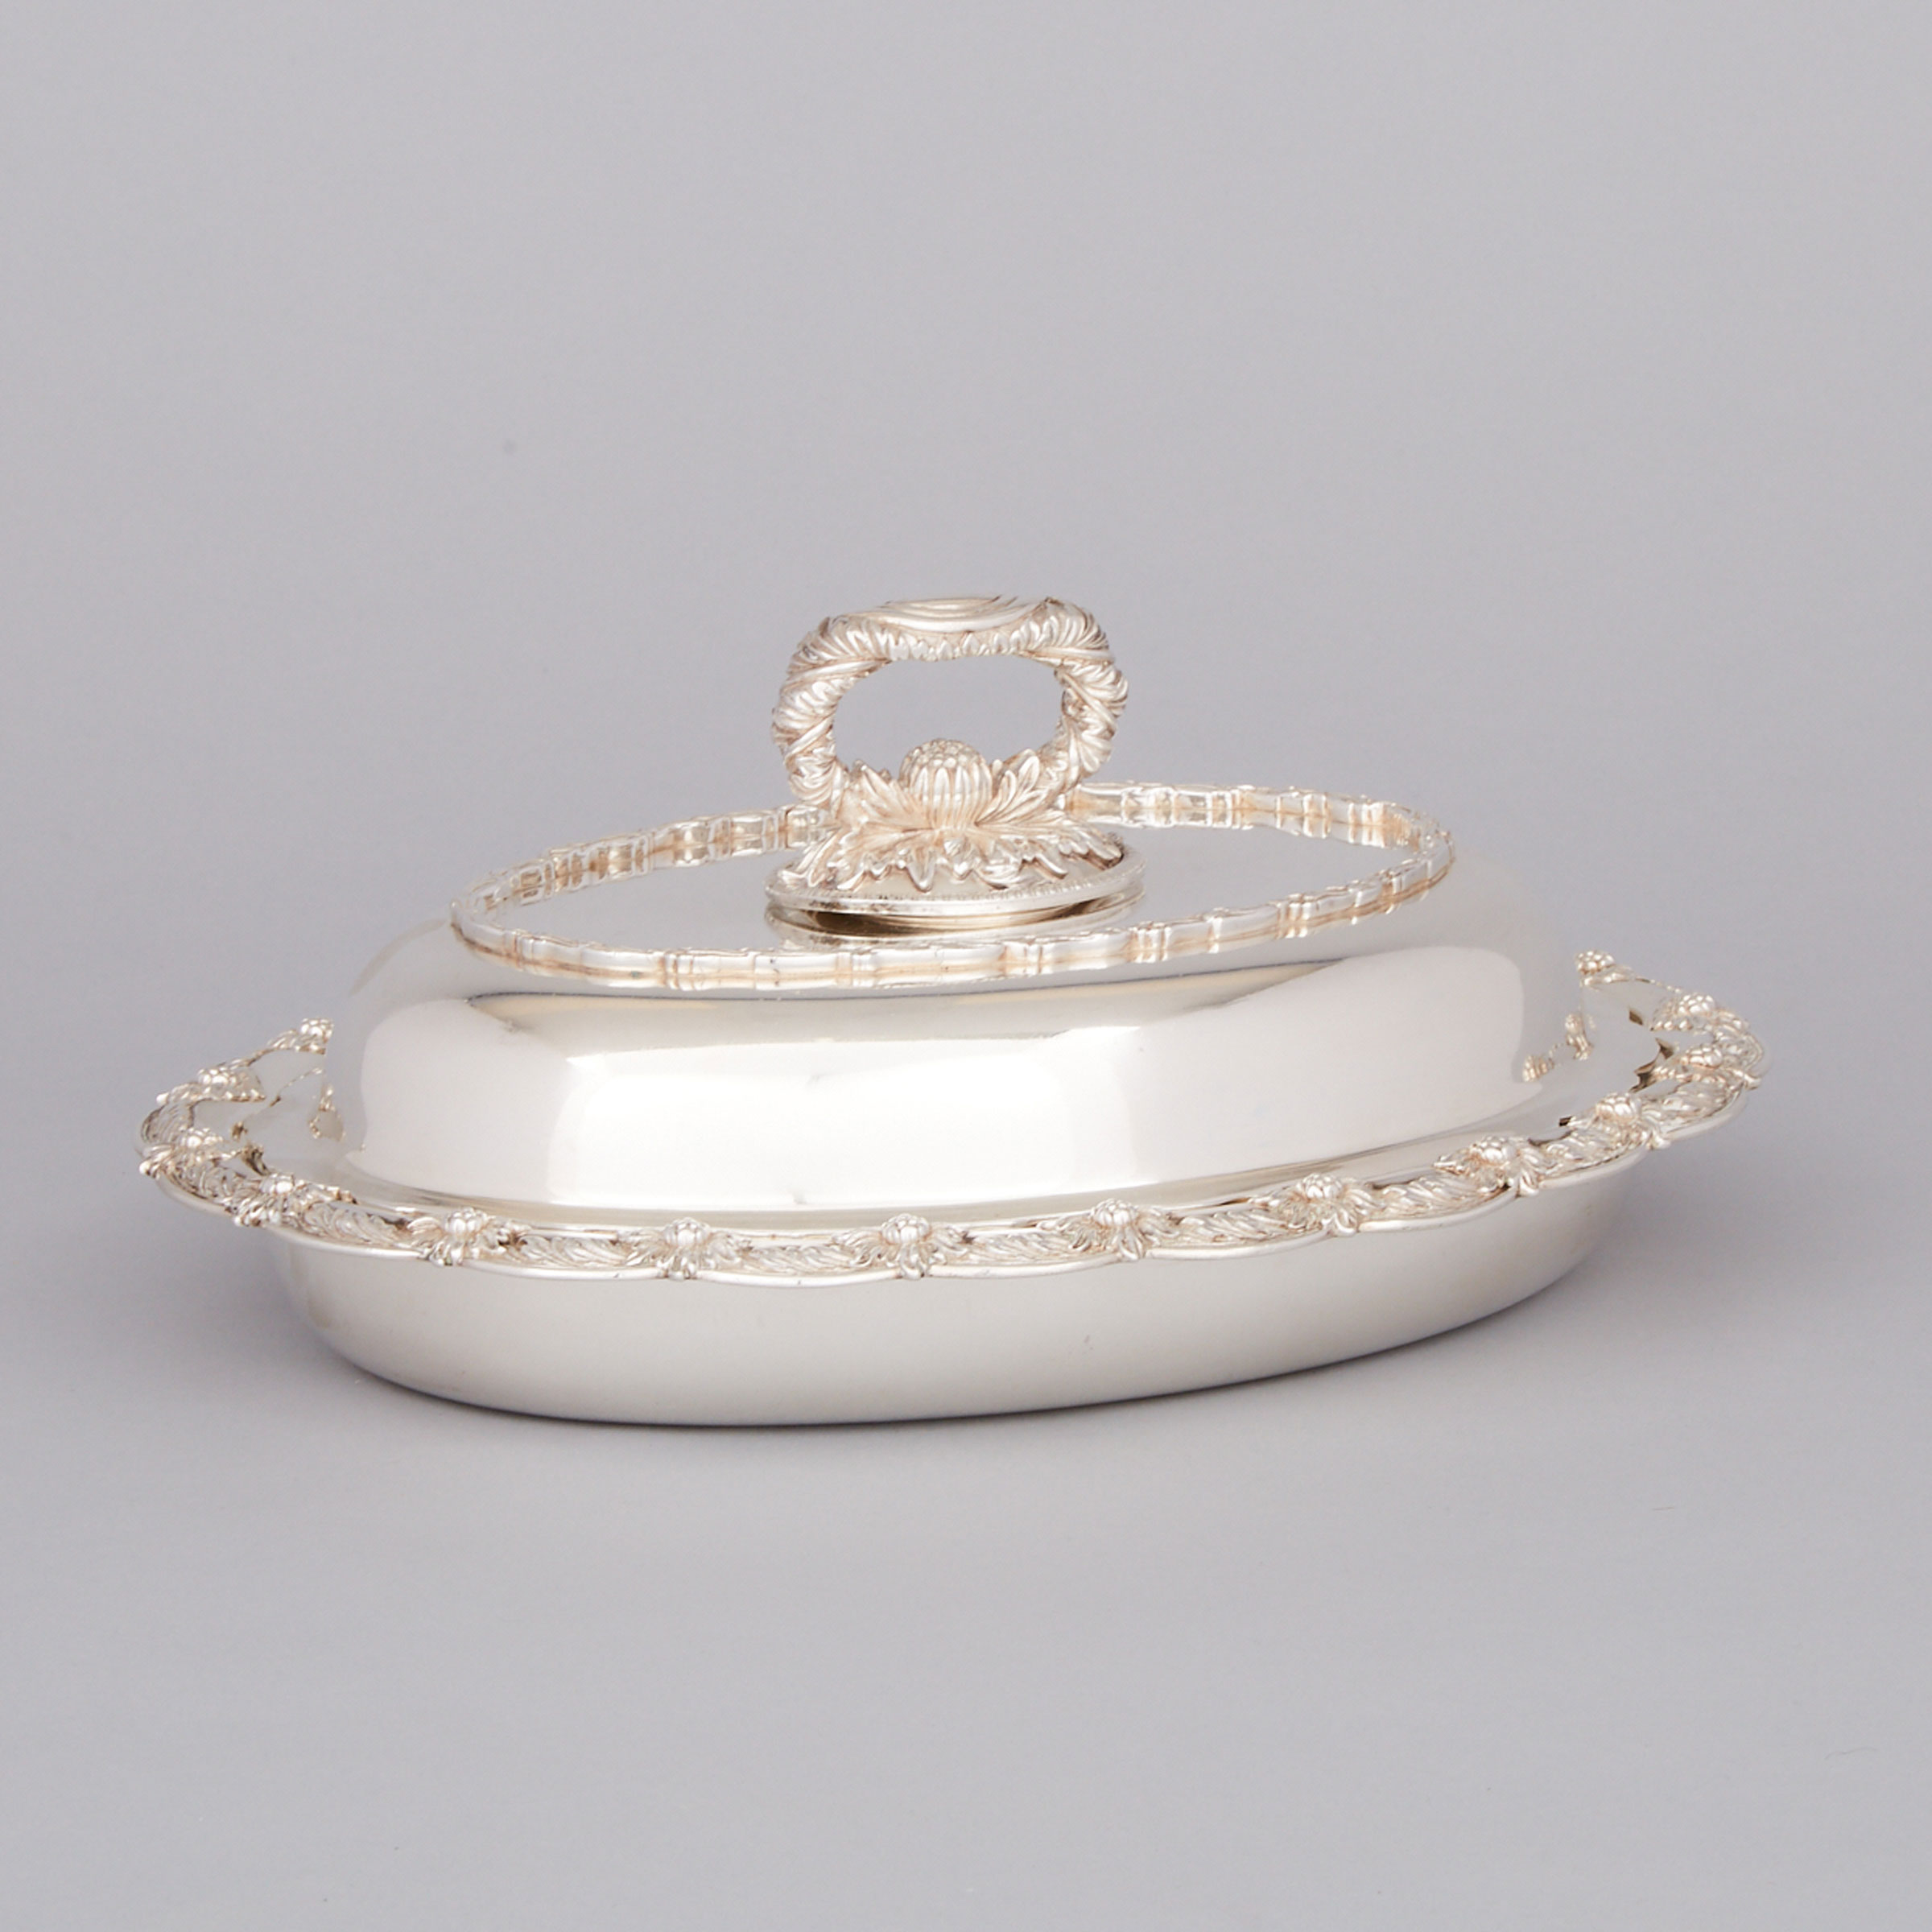 American Silver ‘Chrysanthemum’ Oval Covered Entrée Dish, Tiffany & Co., New York, N.Y., c.1891-1902